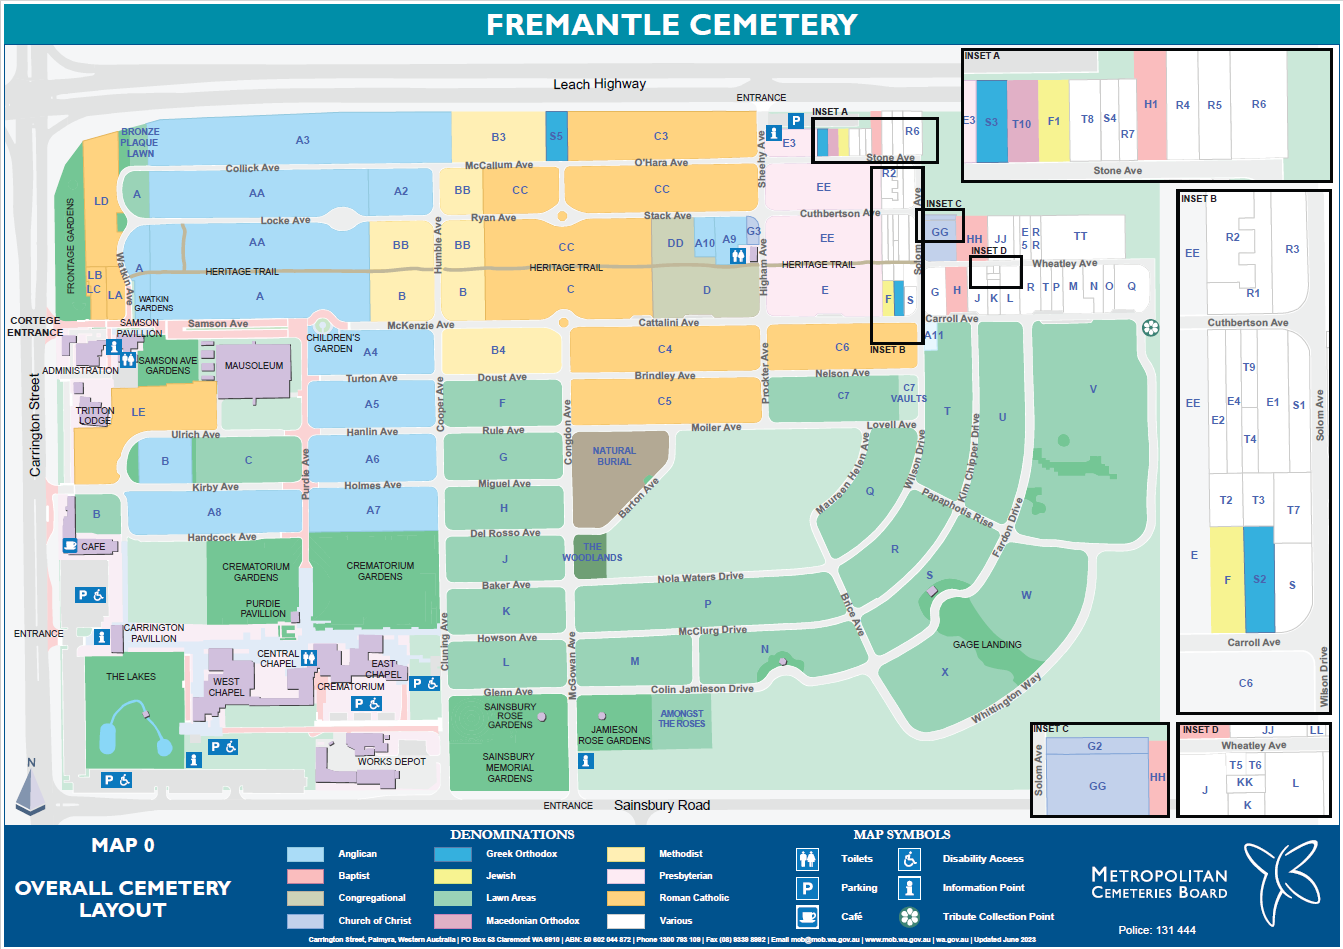 Fremantle Cemetery overall site map showing all sections of the cemetery